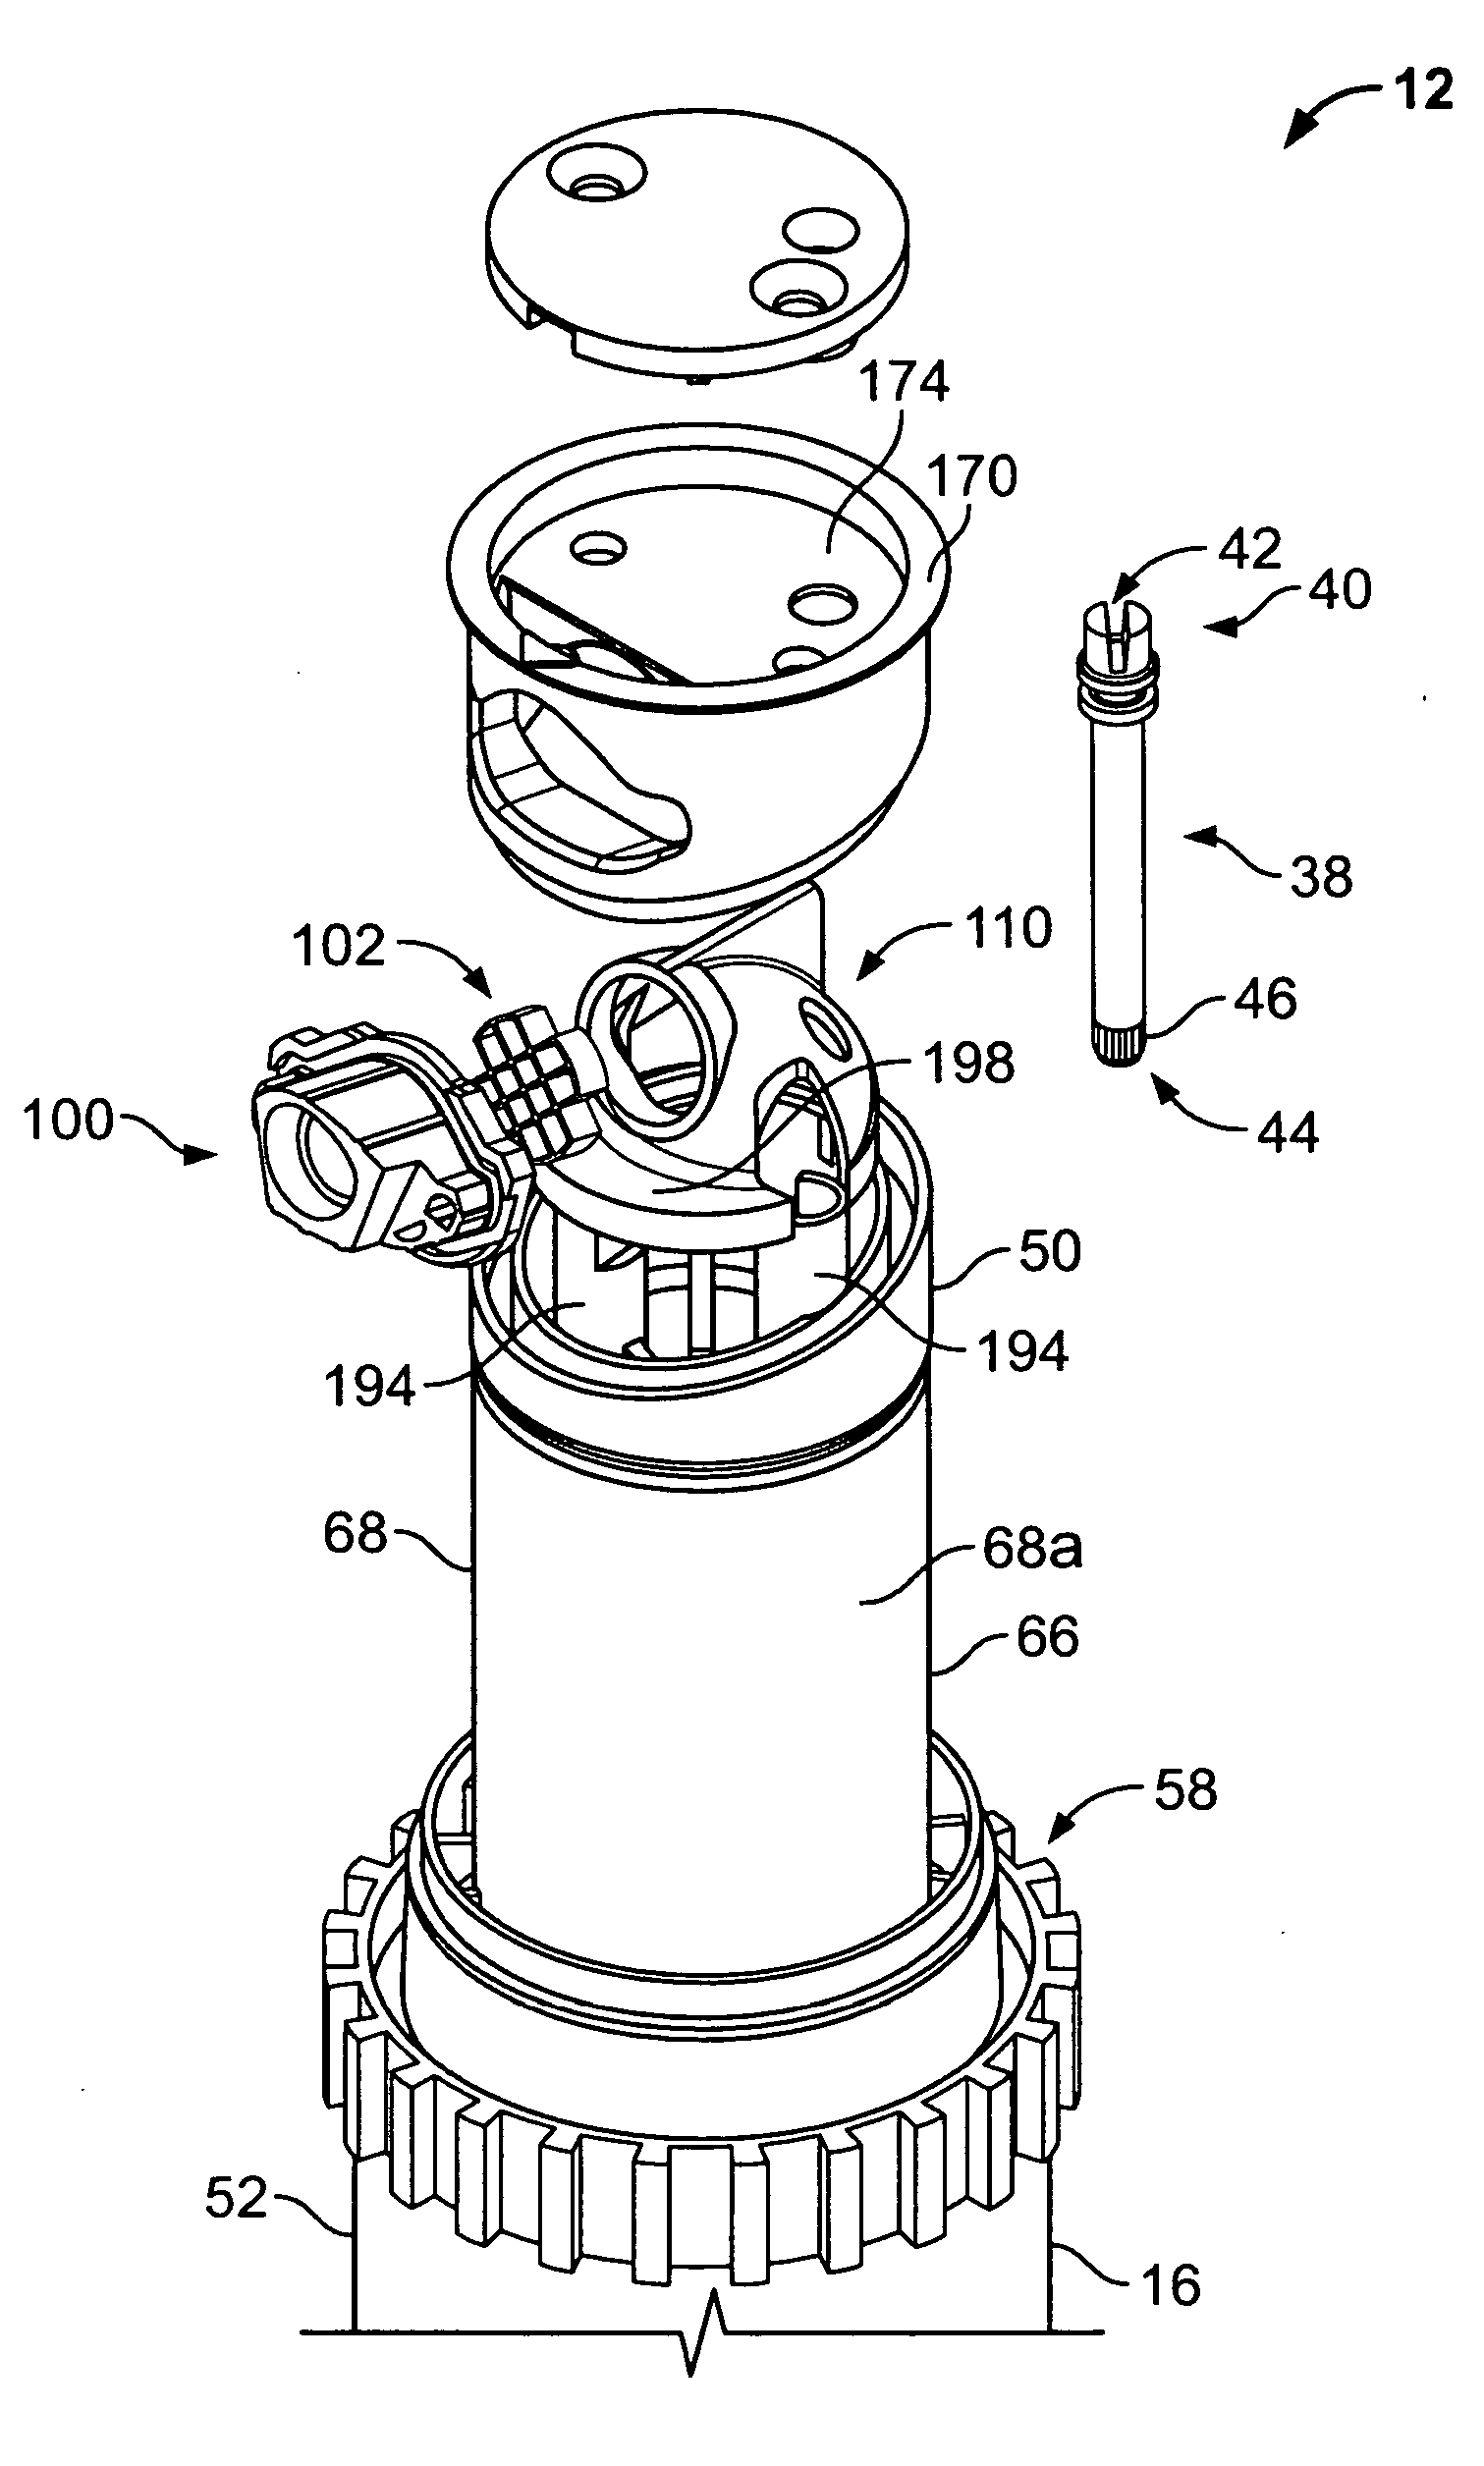 Sprinkler nozzle and flow channel